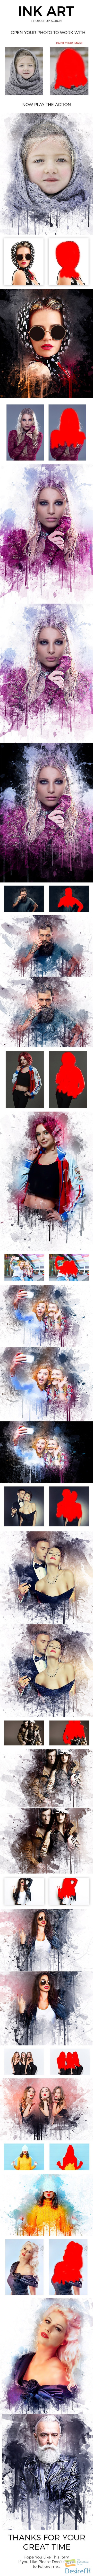 GraphicRiver - Ink Art Photoshop Action 21029026